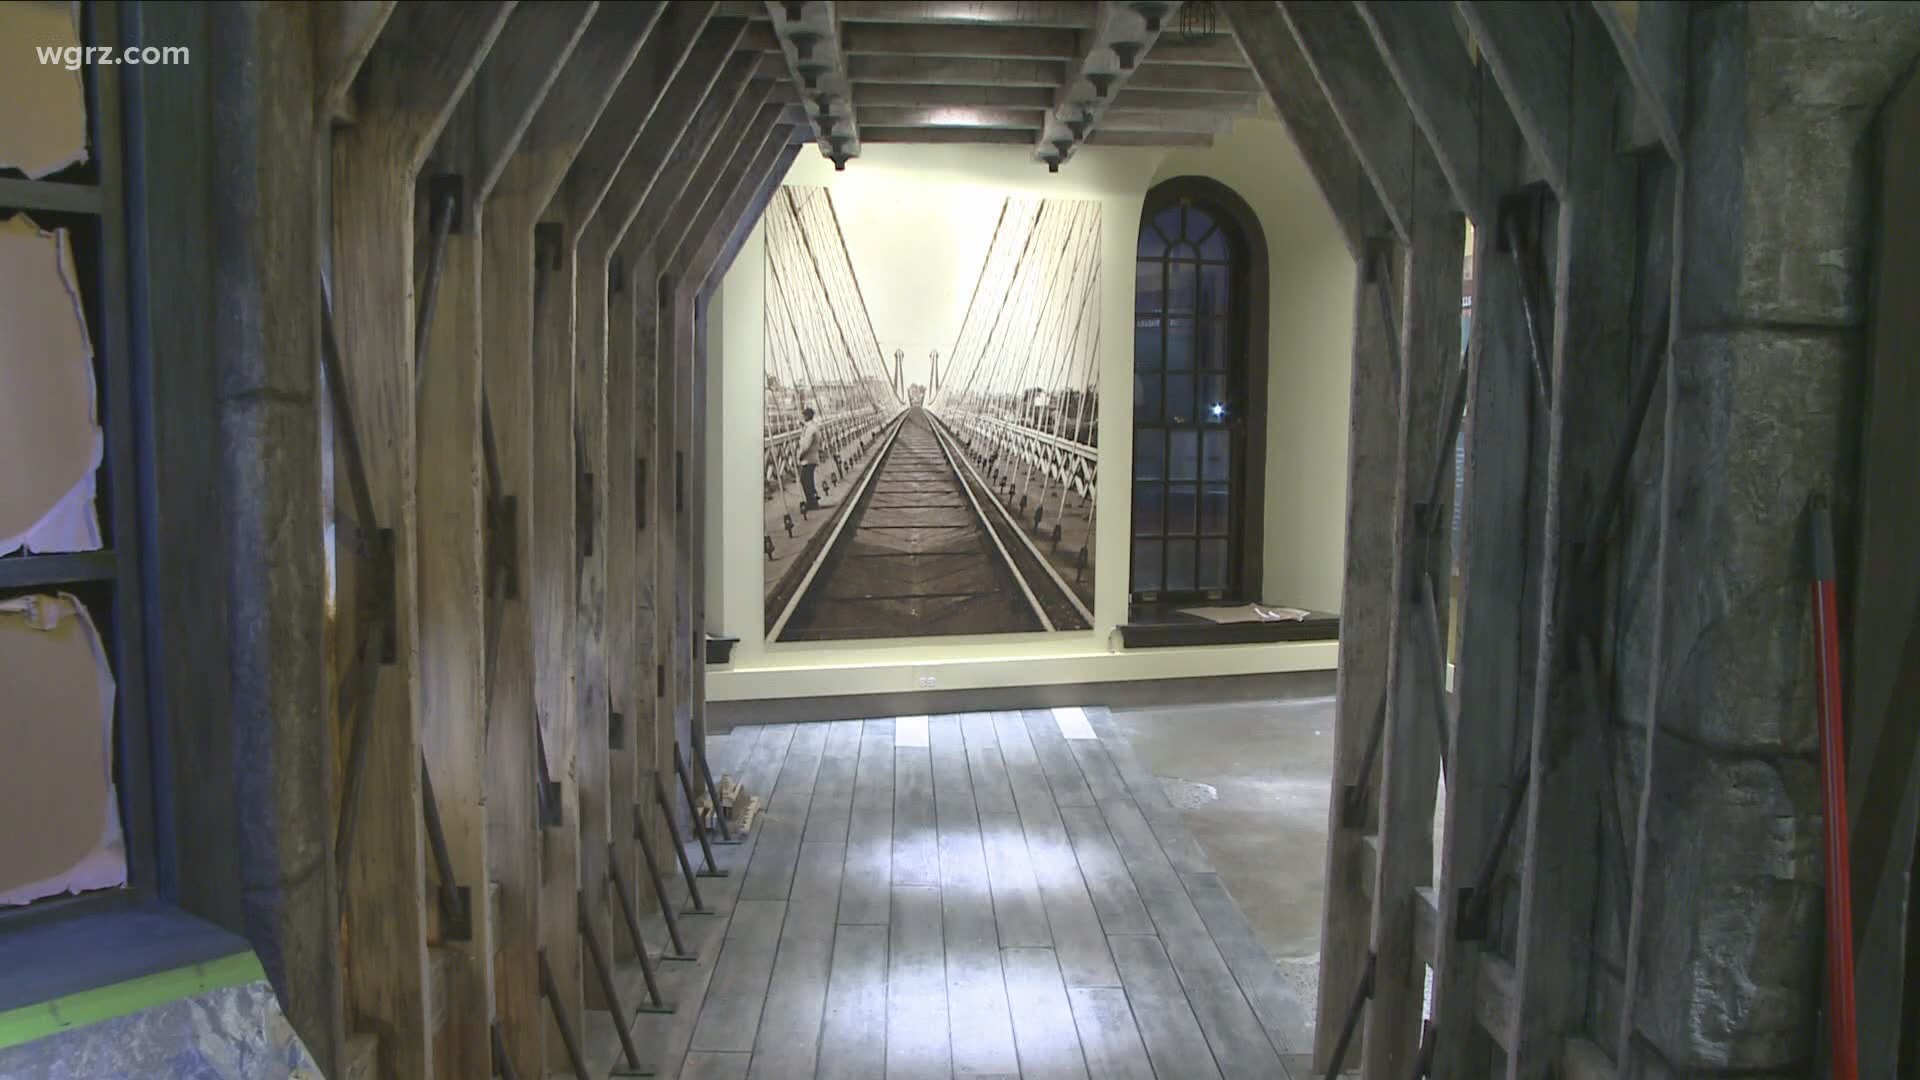 Underground RR Heritage Center stays active while closed